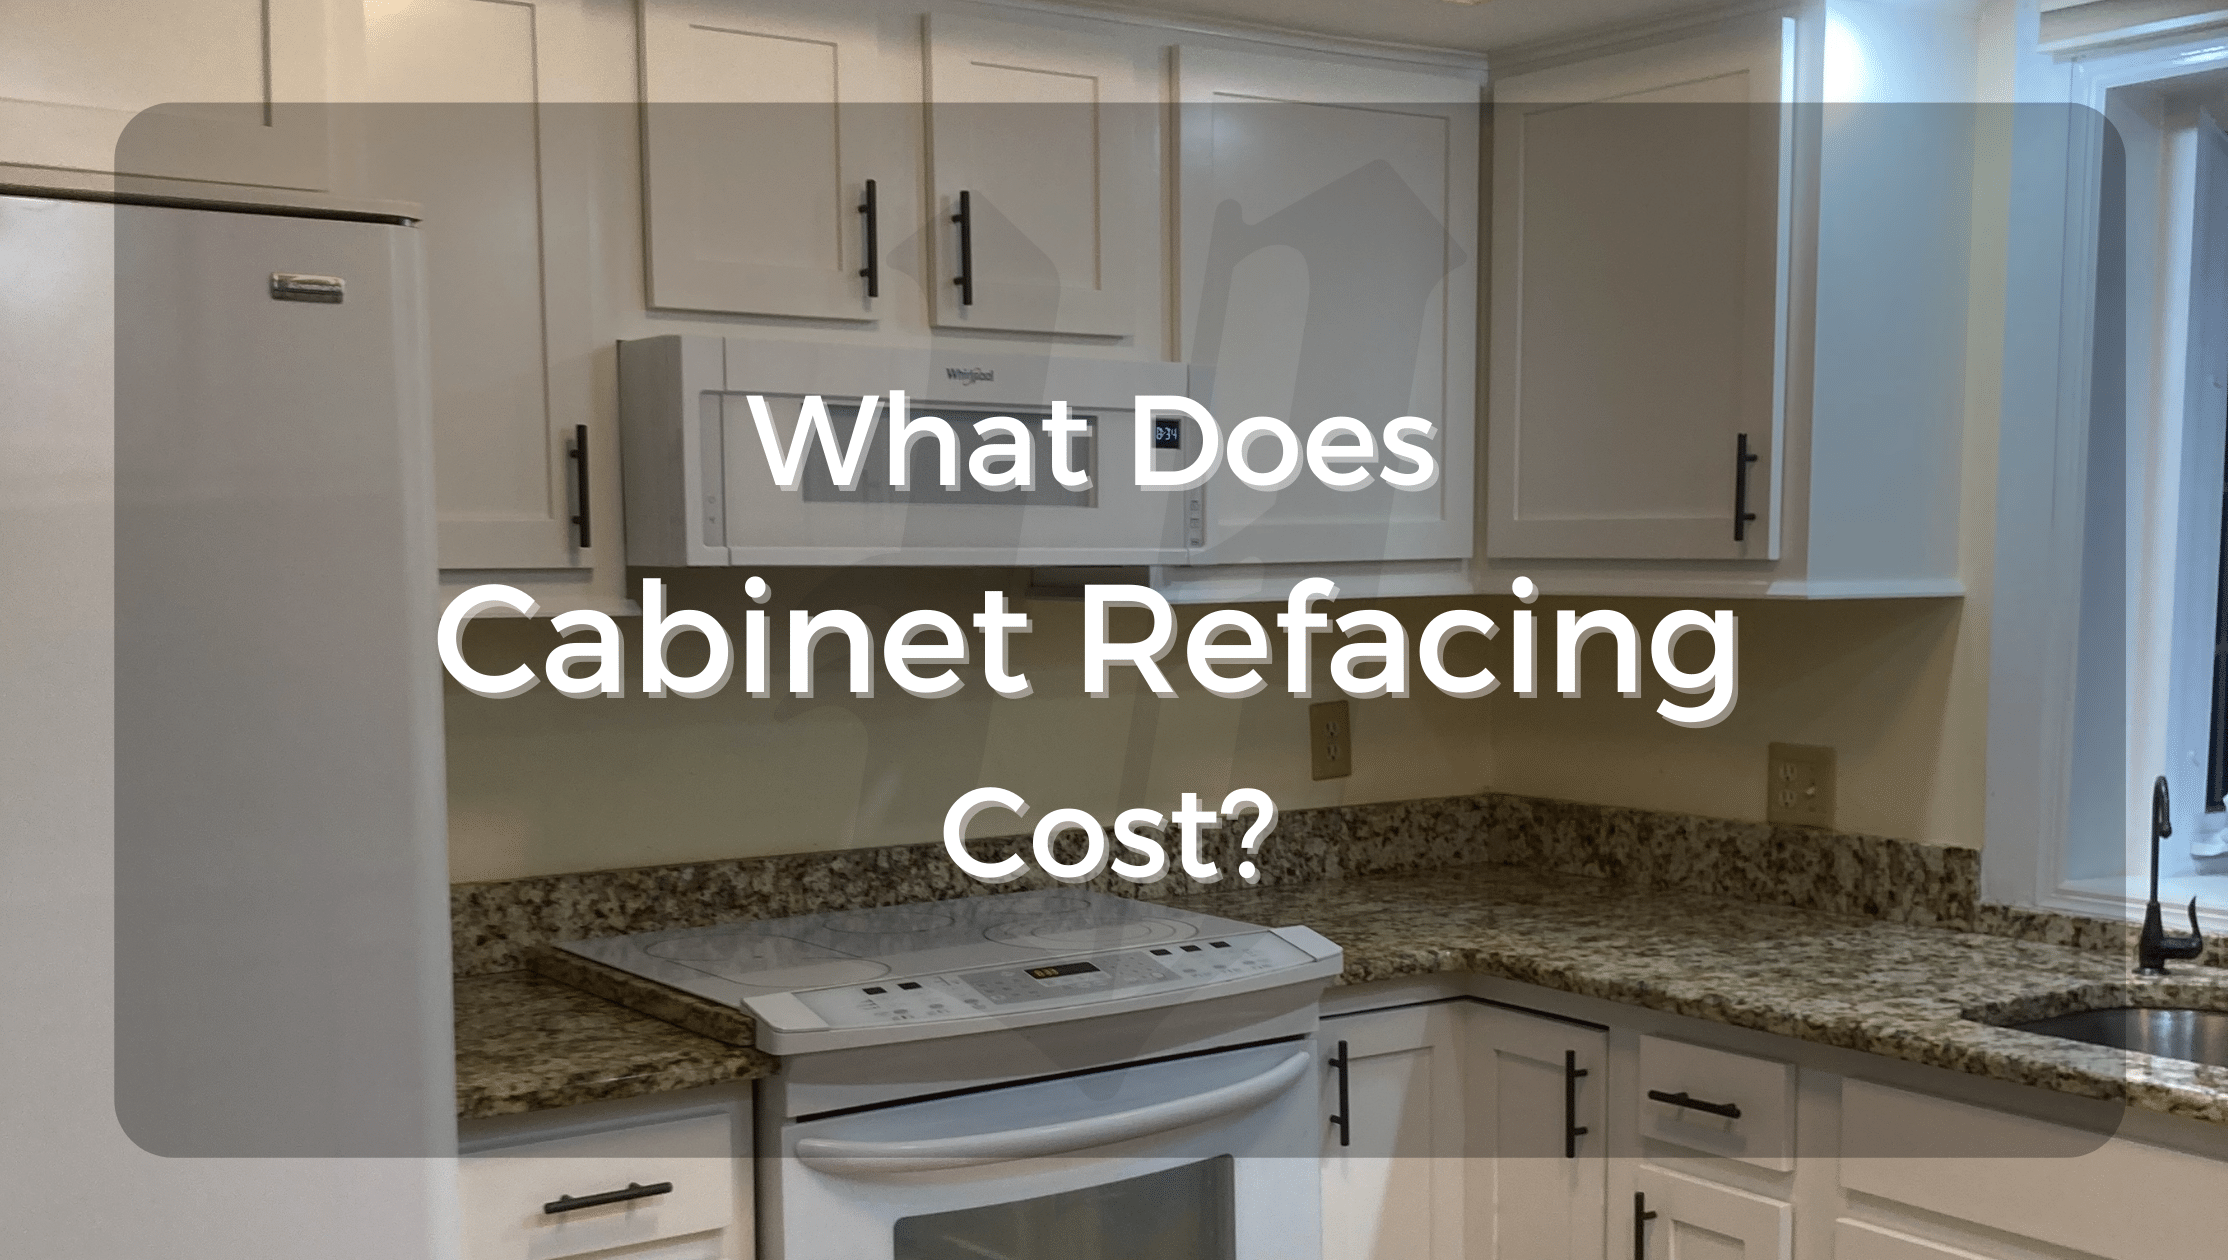 What Does Cabinet Refacing Cost?